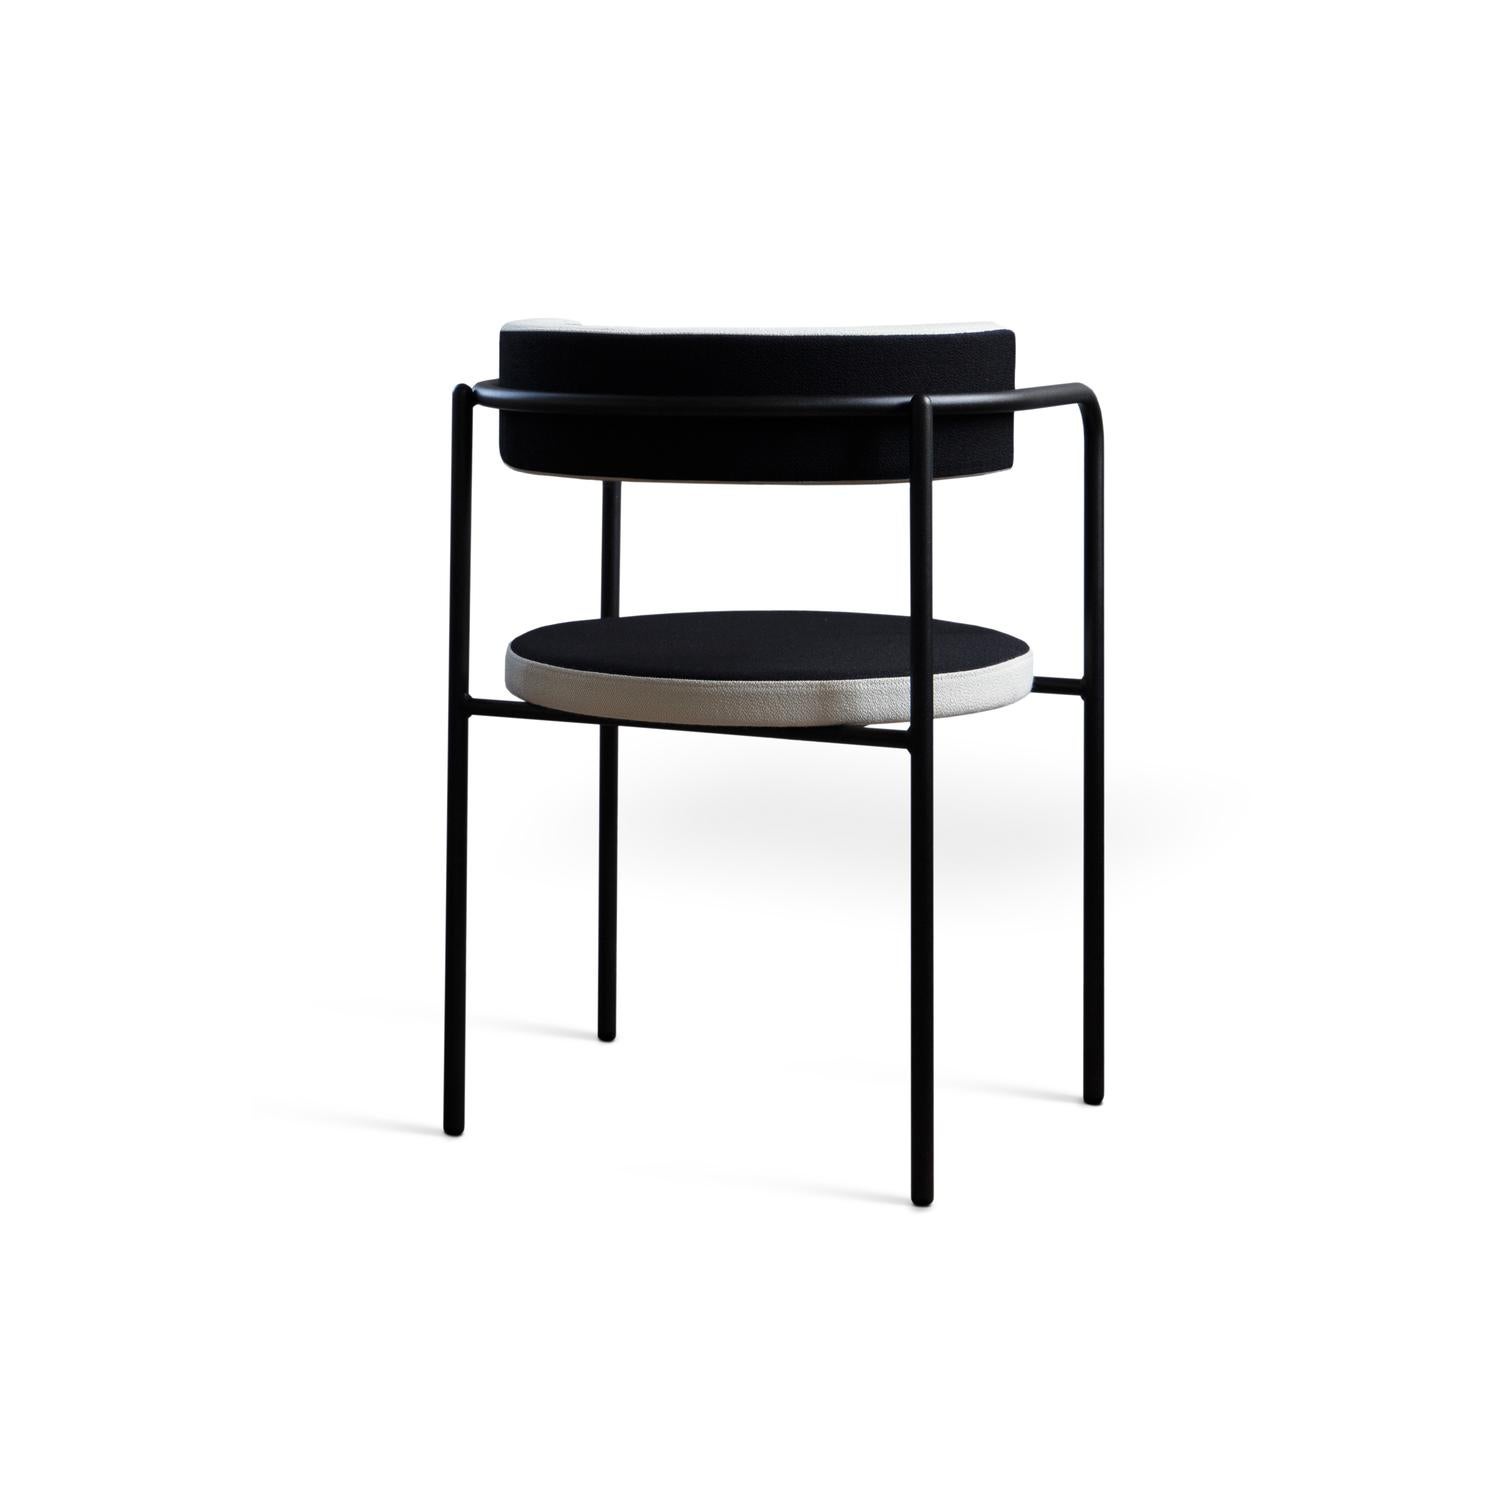 FF 4-Legs, chair 
Design: Friends & Founders

Model shown : VIDAR 3 - KVADRAT 1880 Black + 1511 White

Upholstery available in a wide range of fabrics and leathers

Legs:
4 legs or cantilever
Black steel or chrome

Back:
Rounded or cubic


Price may